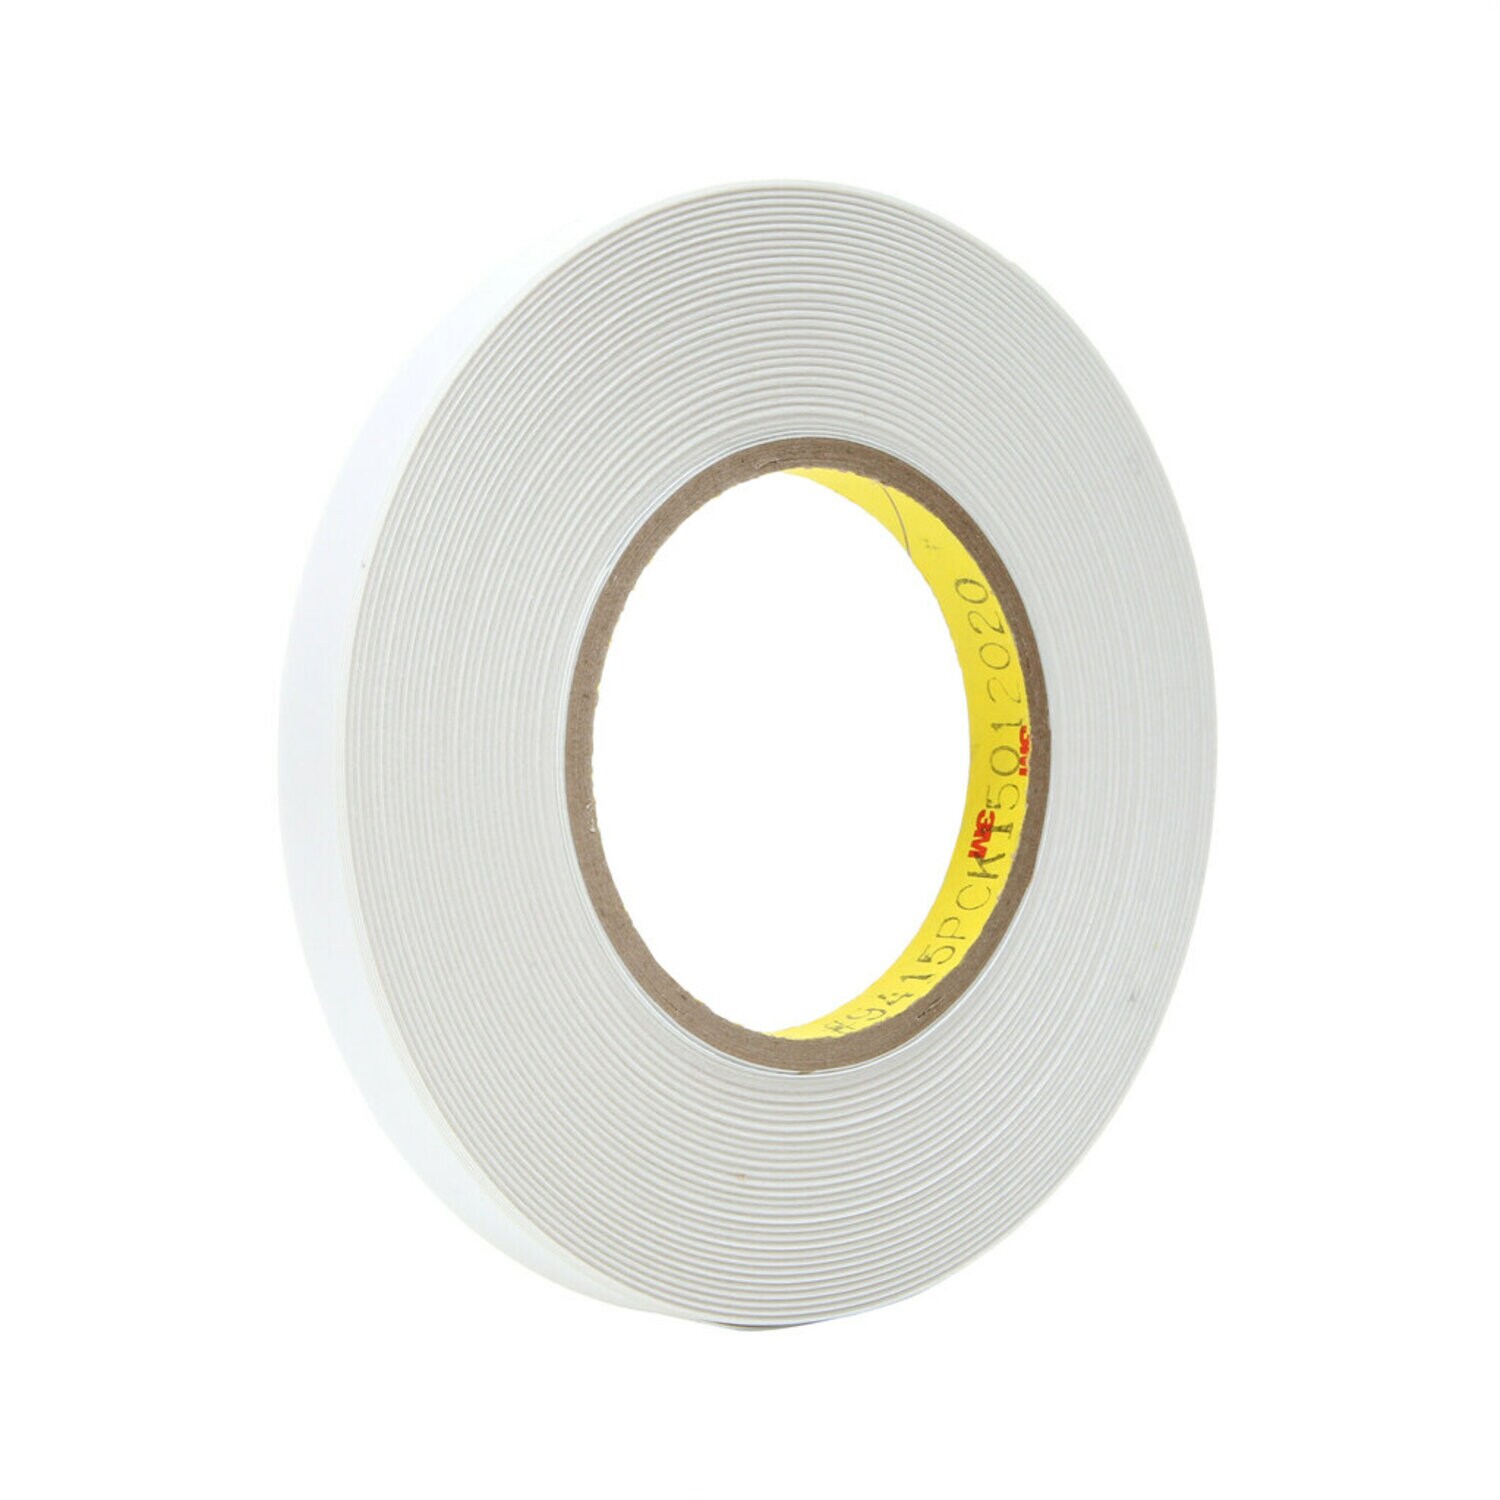 7100023338 - 3M Removable Repositionable Tape 9415PC, Clear, 2 in x 72 yd, 2 mil, 24
Rolls/Case